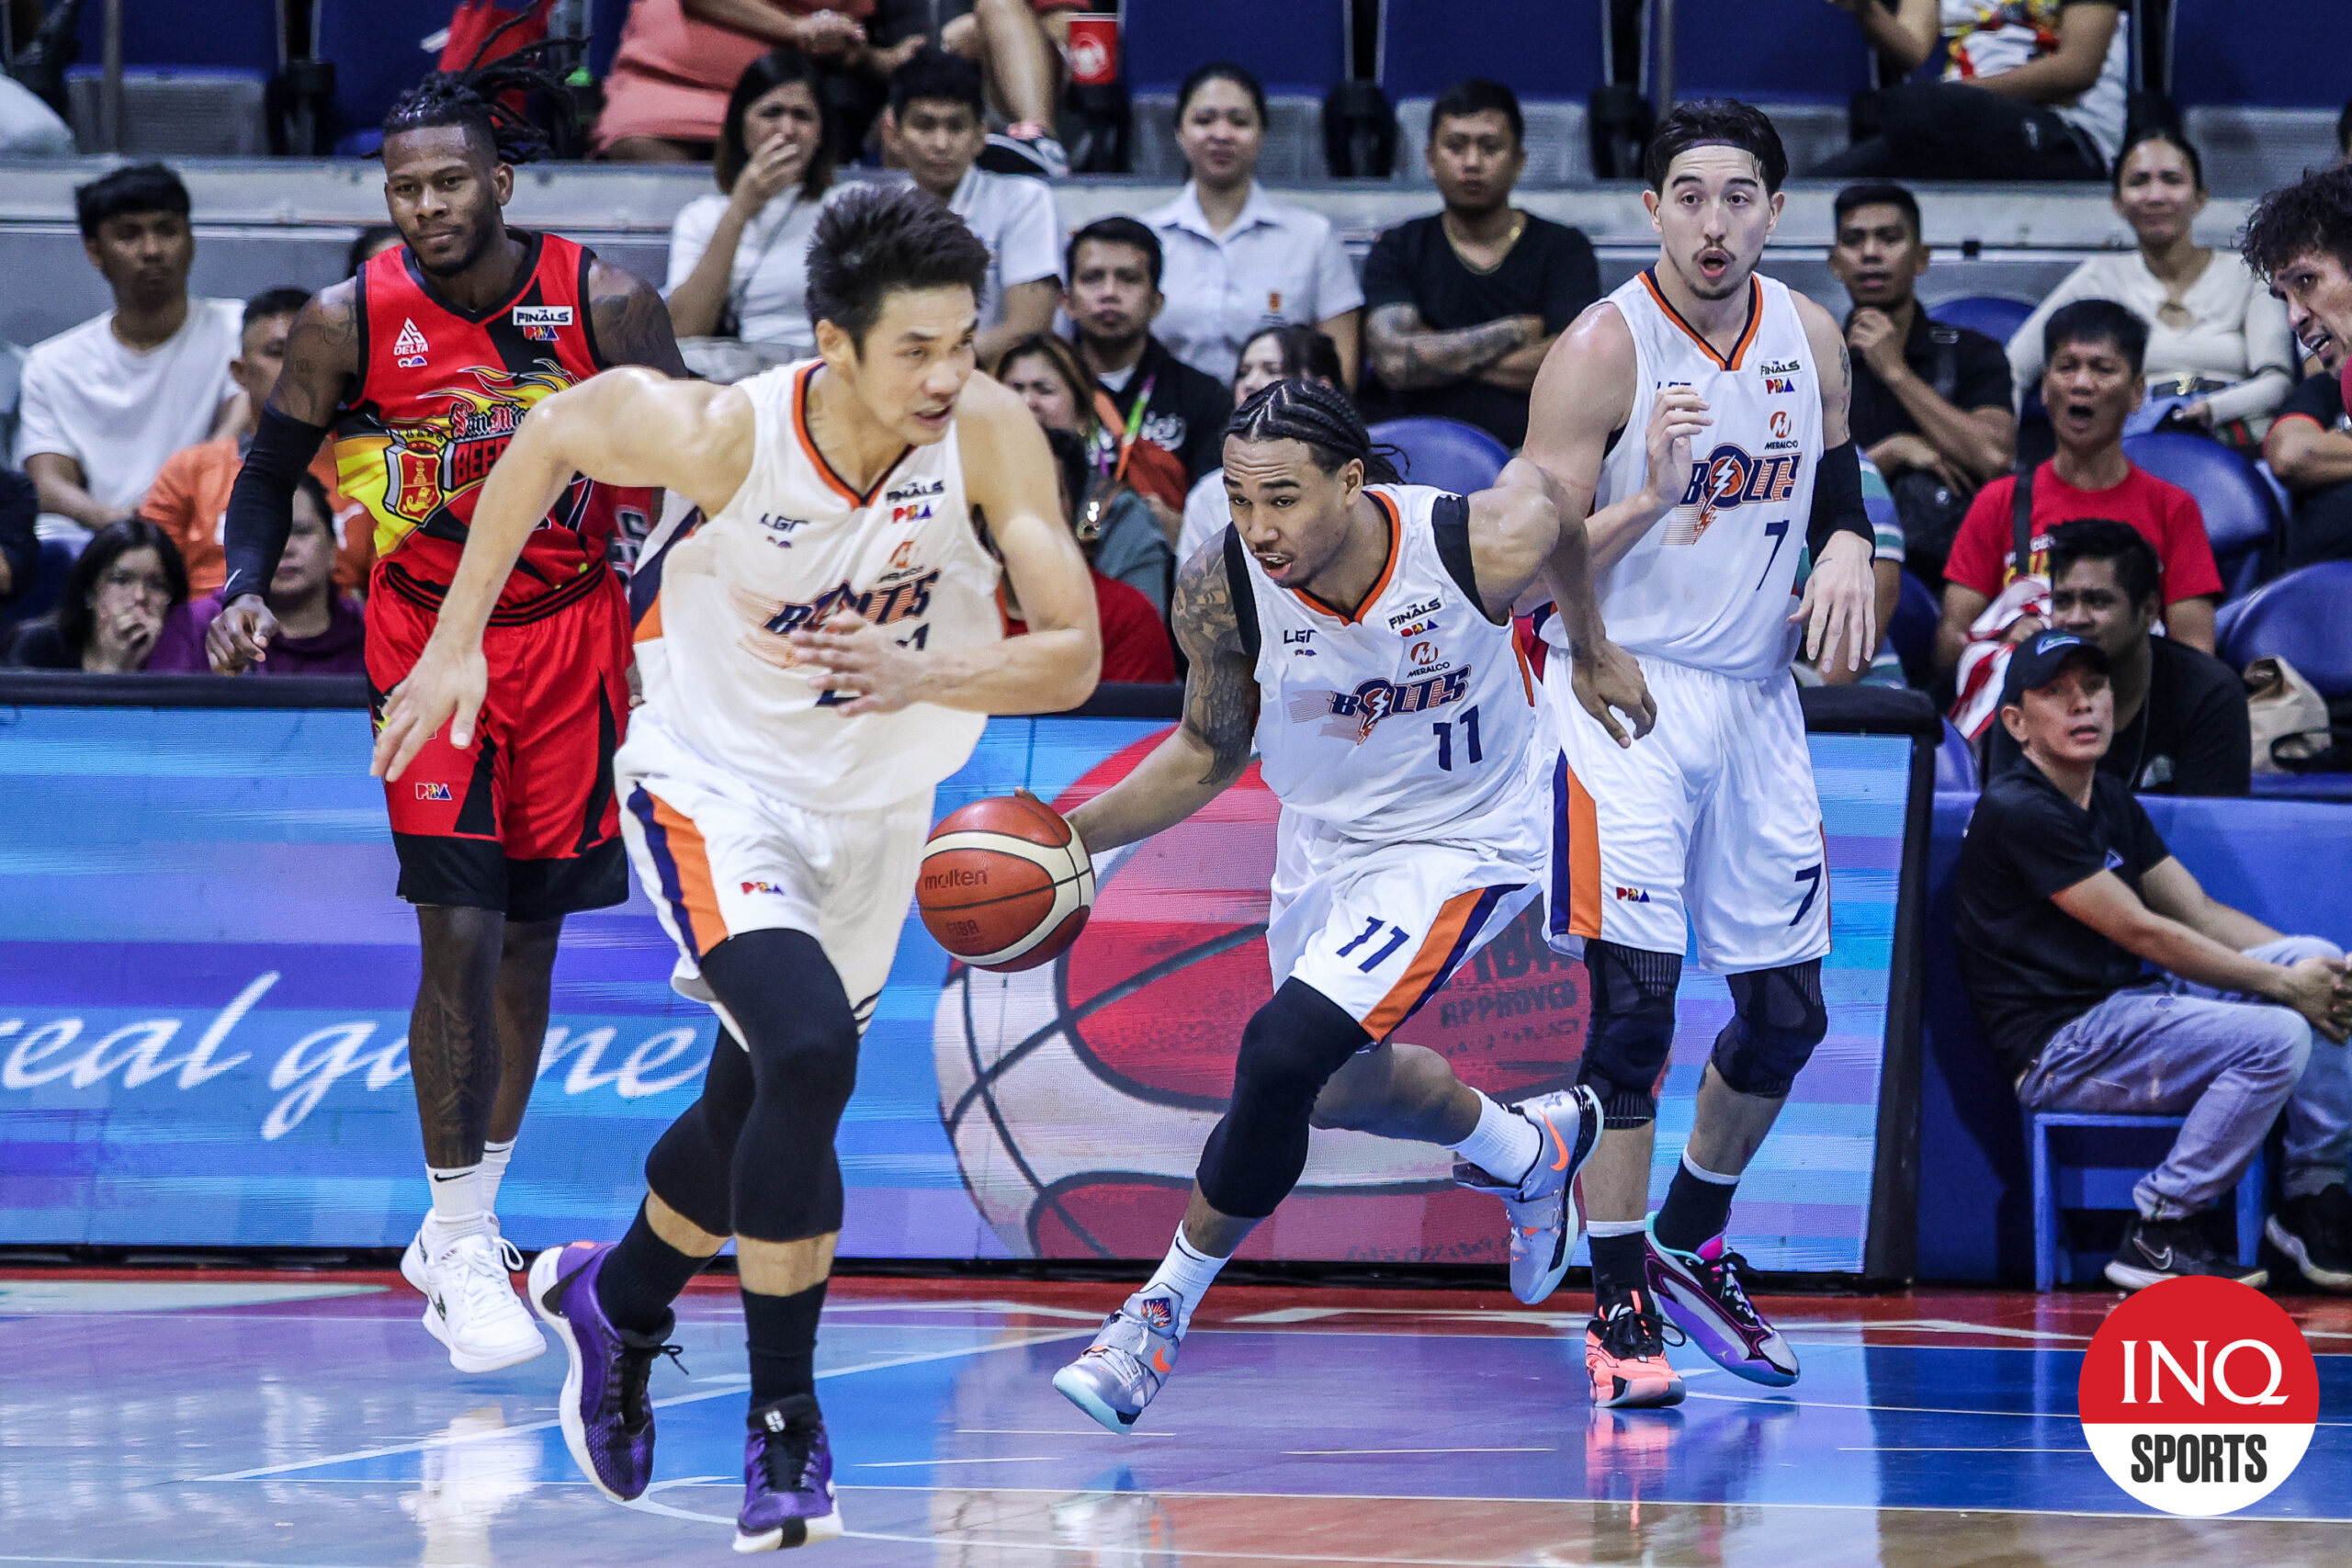 Chris Newsome and the Meralco Bolts repeat over the San Miguel Beermen to get a 1-0 lead in the PBA Philippine Cup Finals.